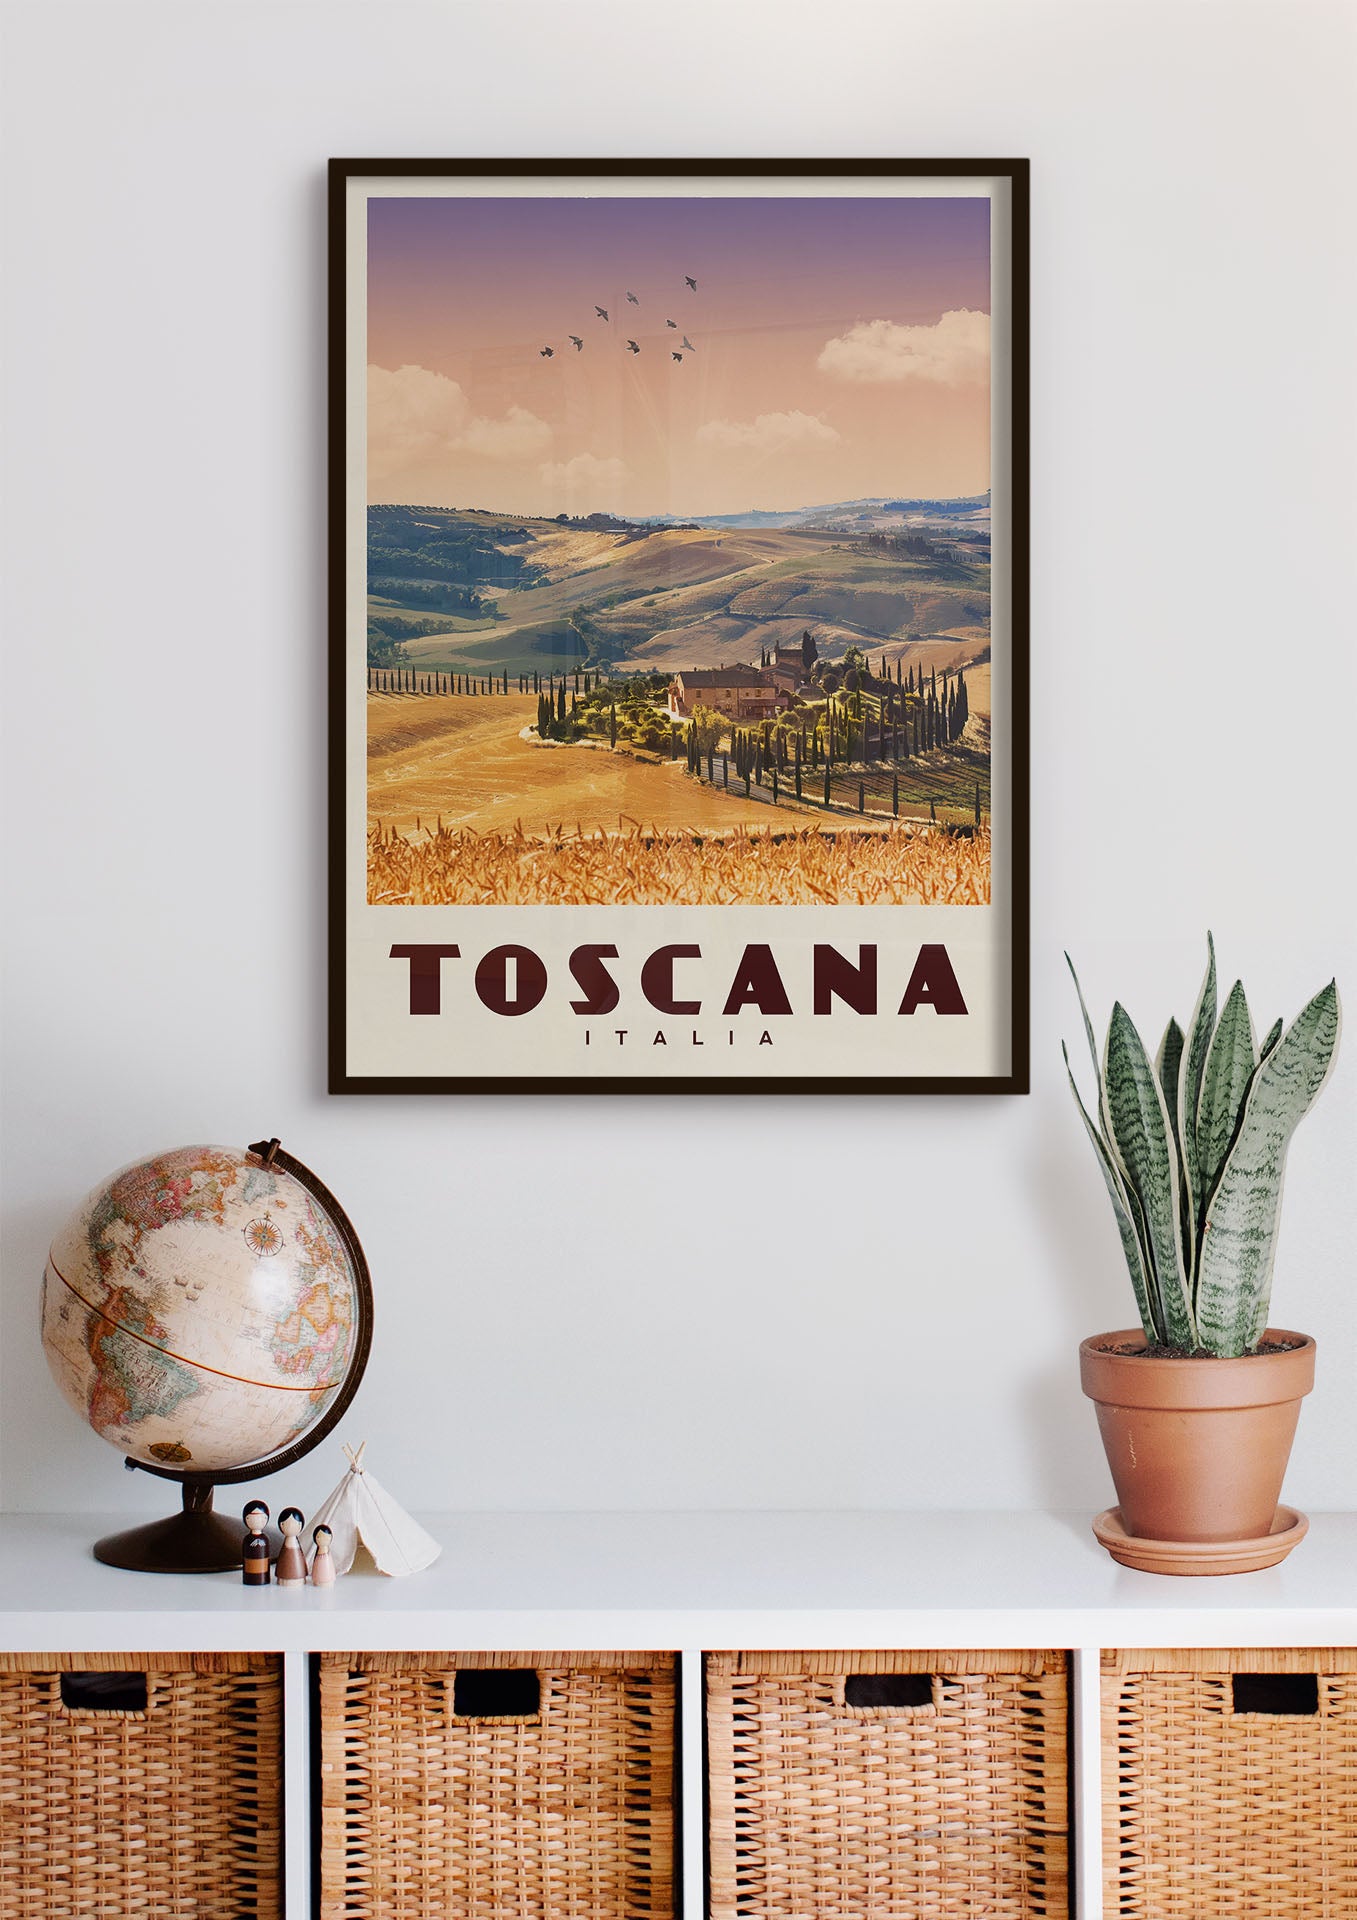 Tuscany, Italy - Vintage Travel Poster